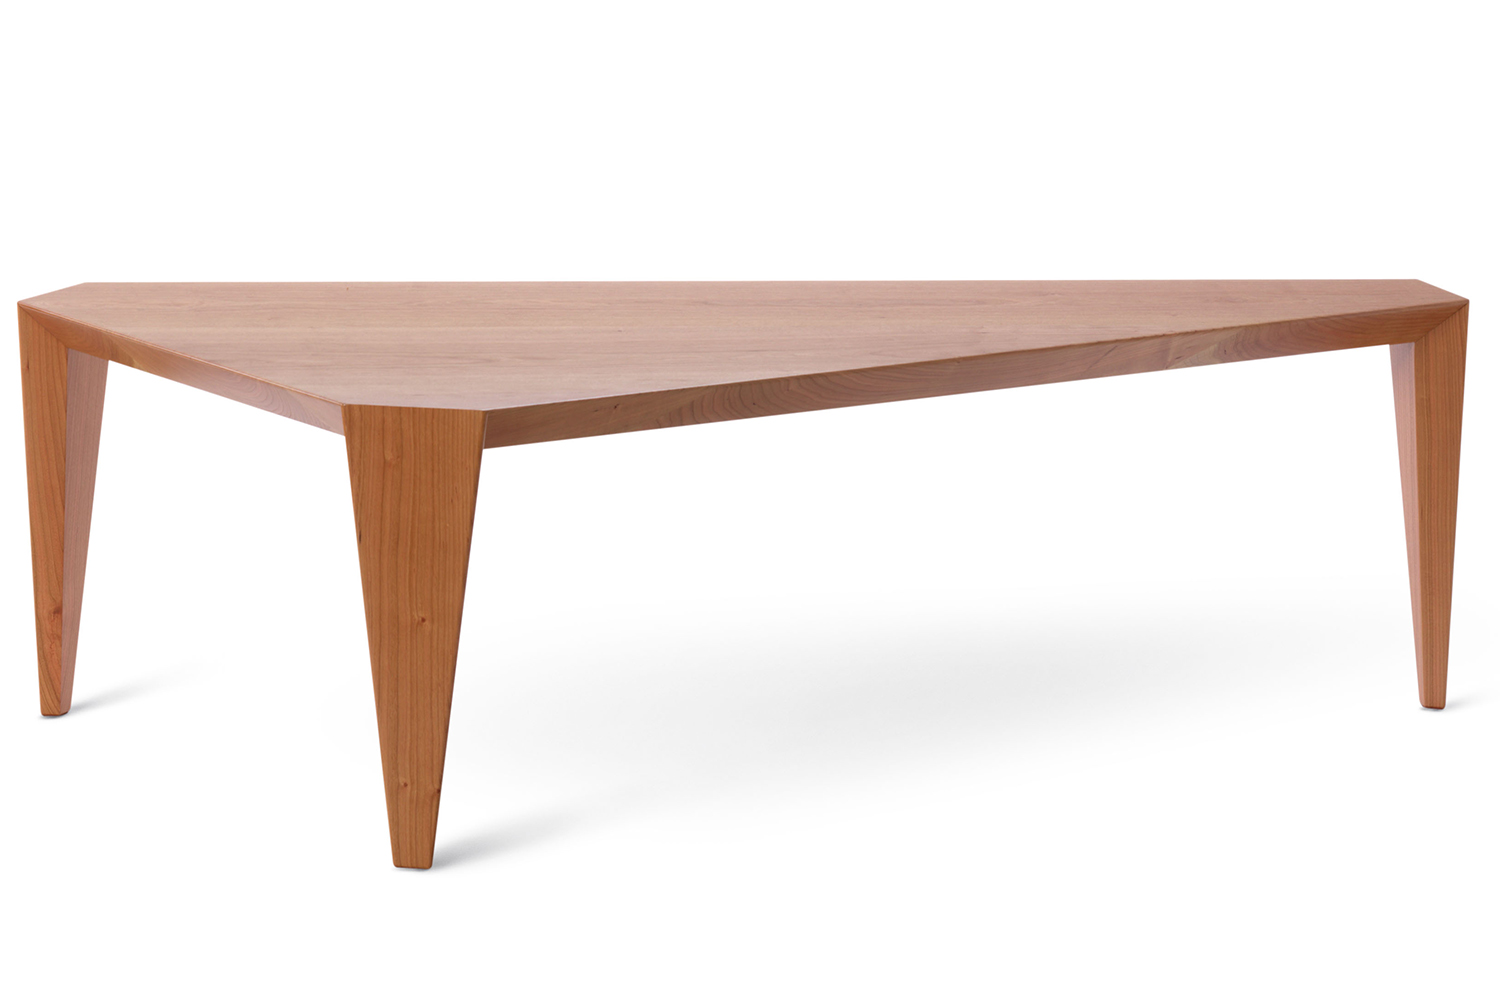 Origami coffee table luxury modern sustainable hardwood handcrafted made in america maine